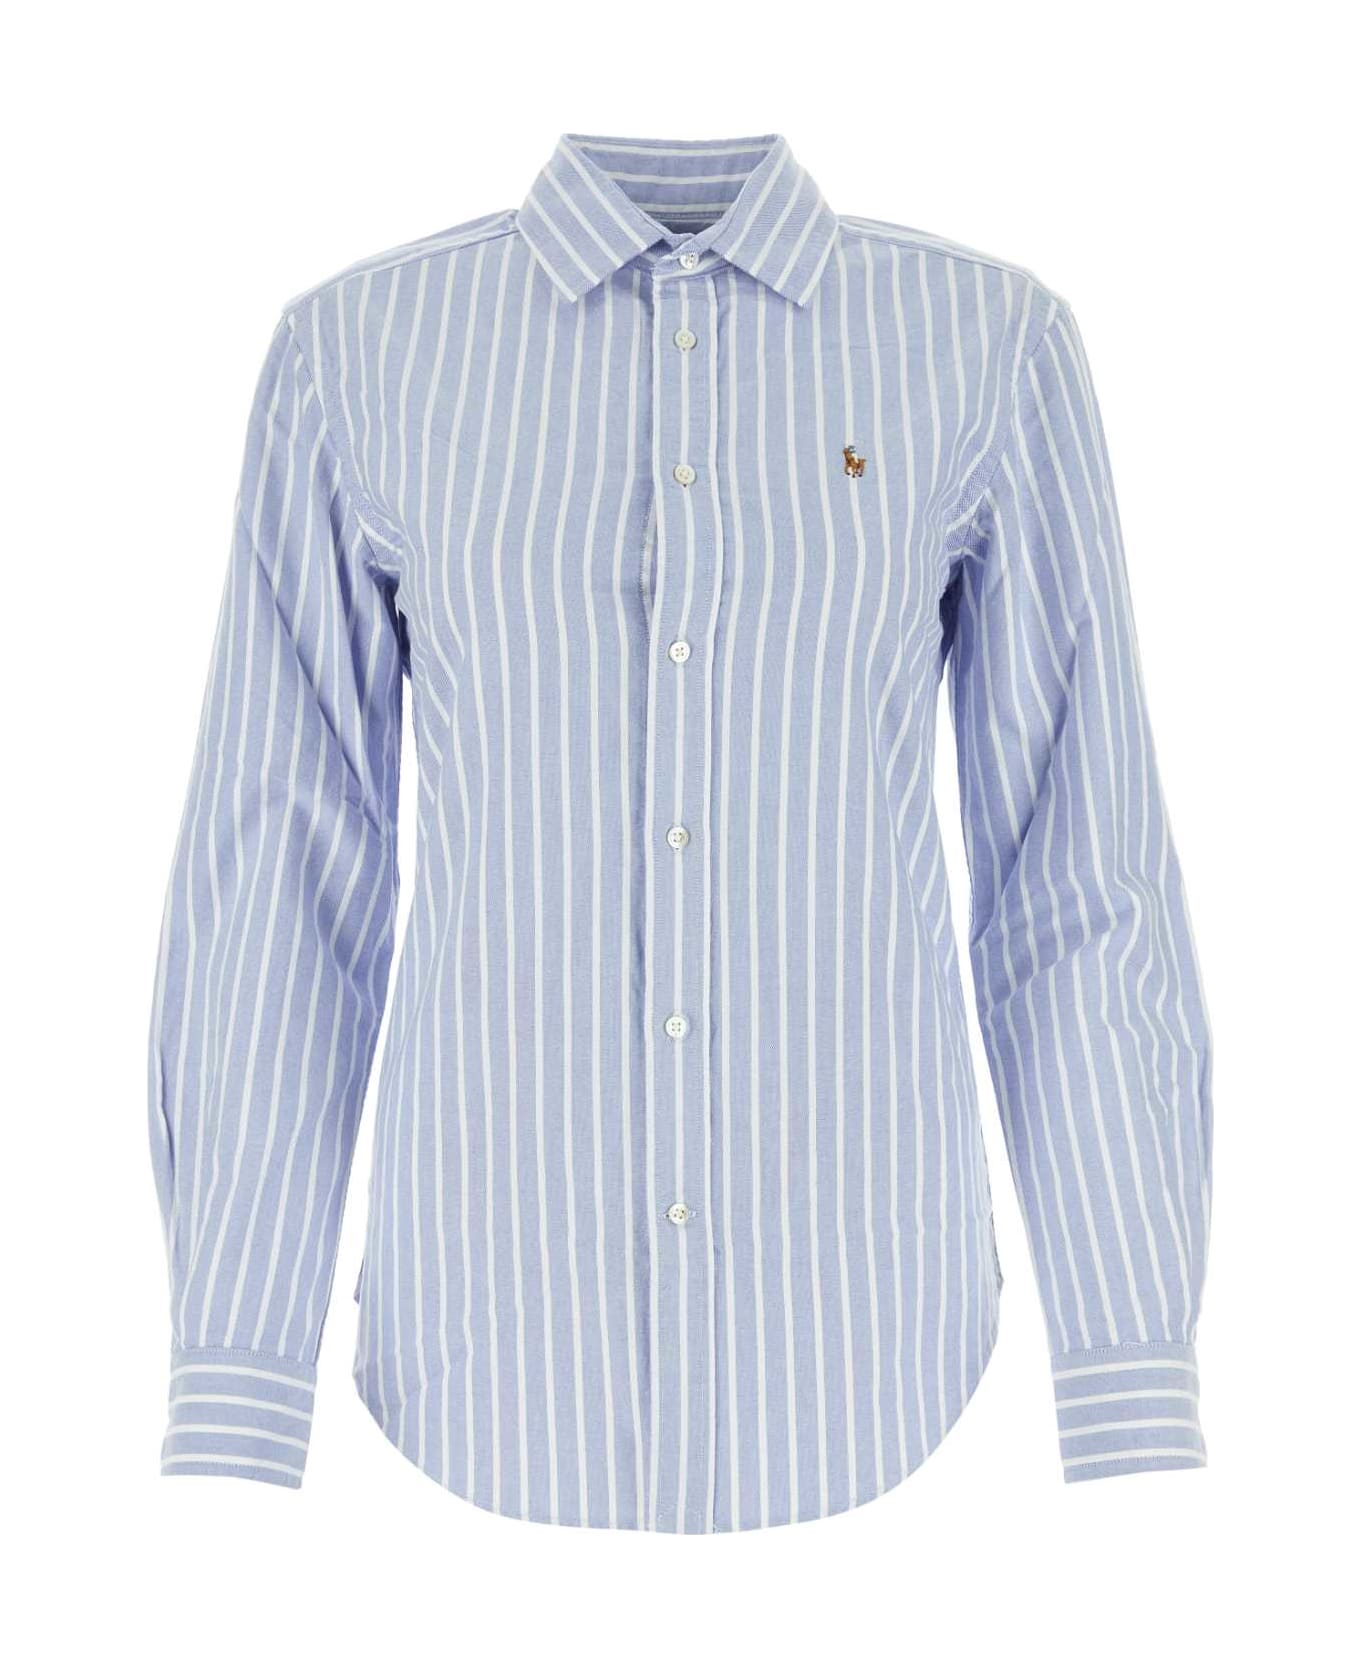 Polo Ralph Lauren Embroidered Oxford Shirt - 004